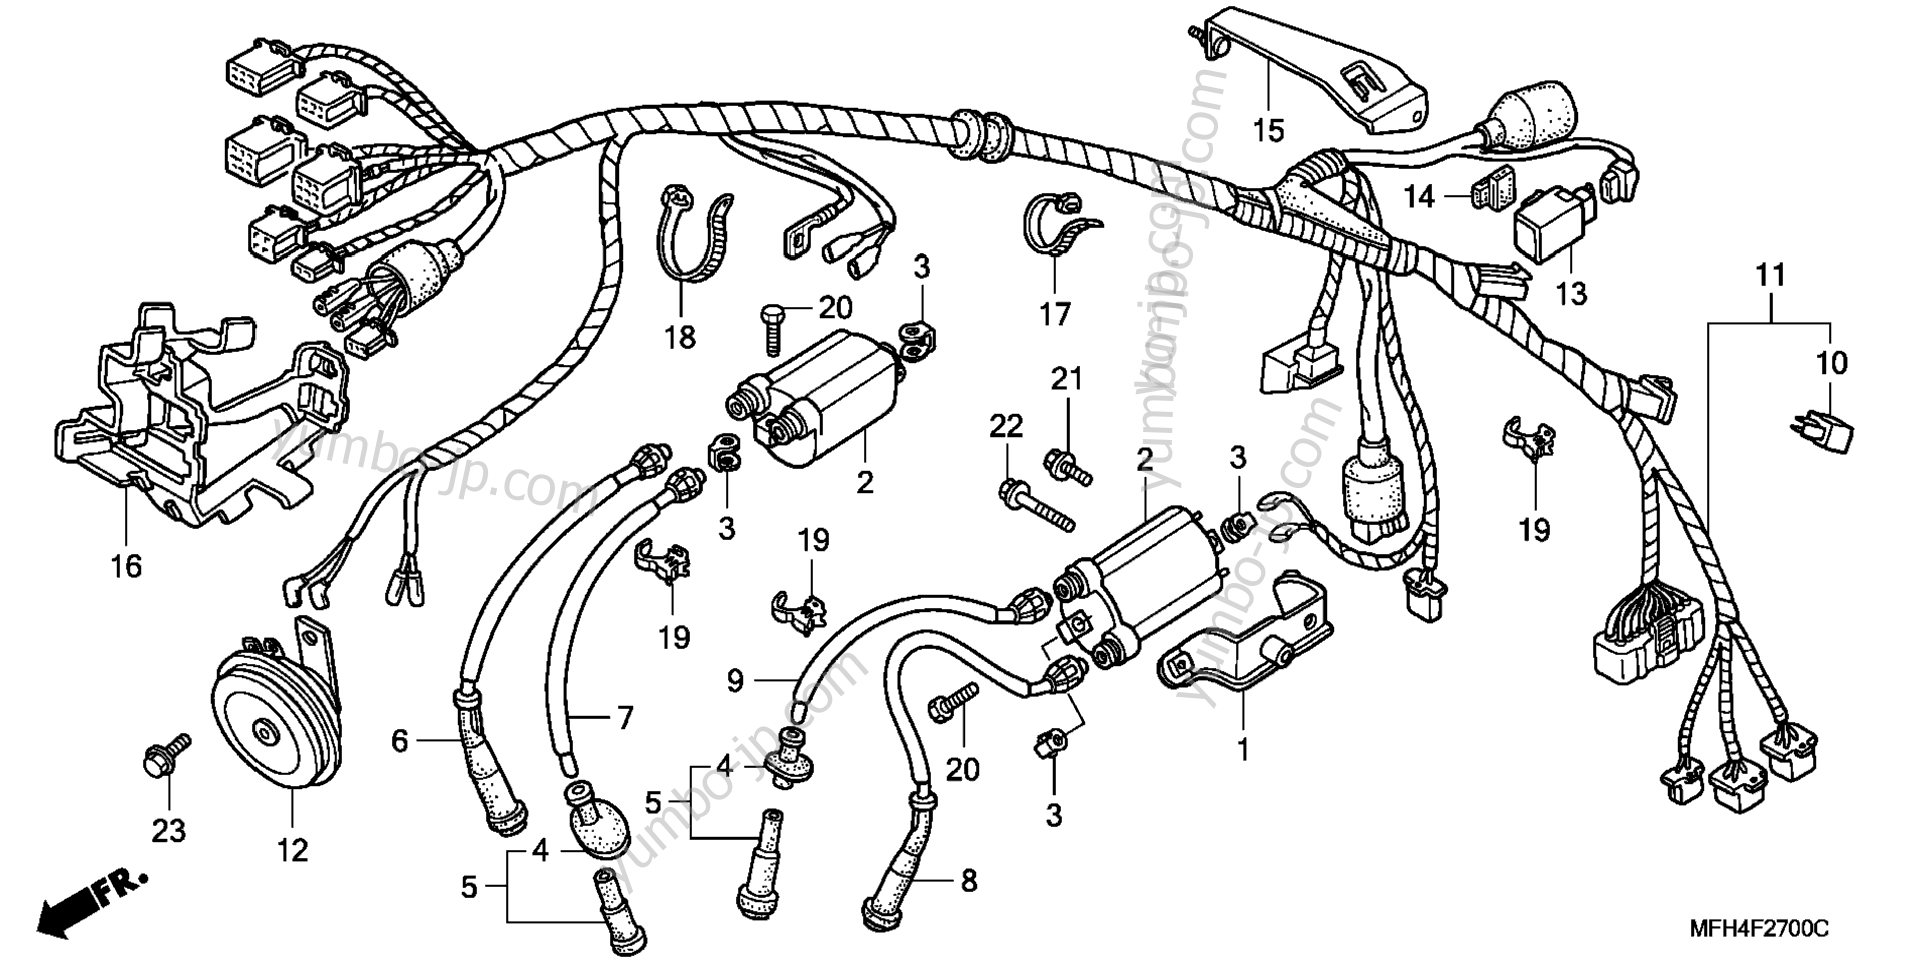 WIRE HARNESS for motorcycles HONDA VT600C A/A 2007 year